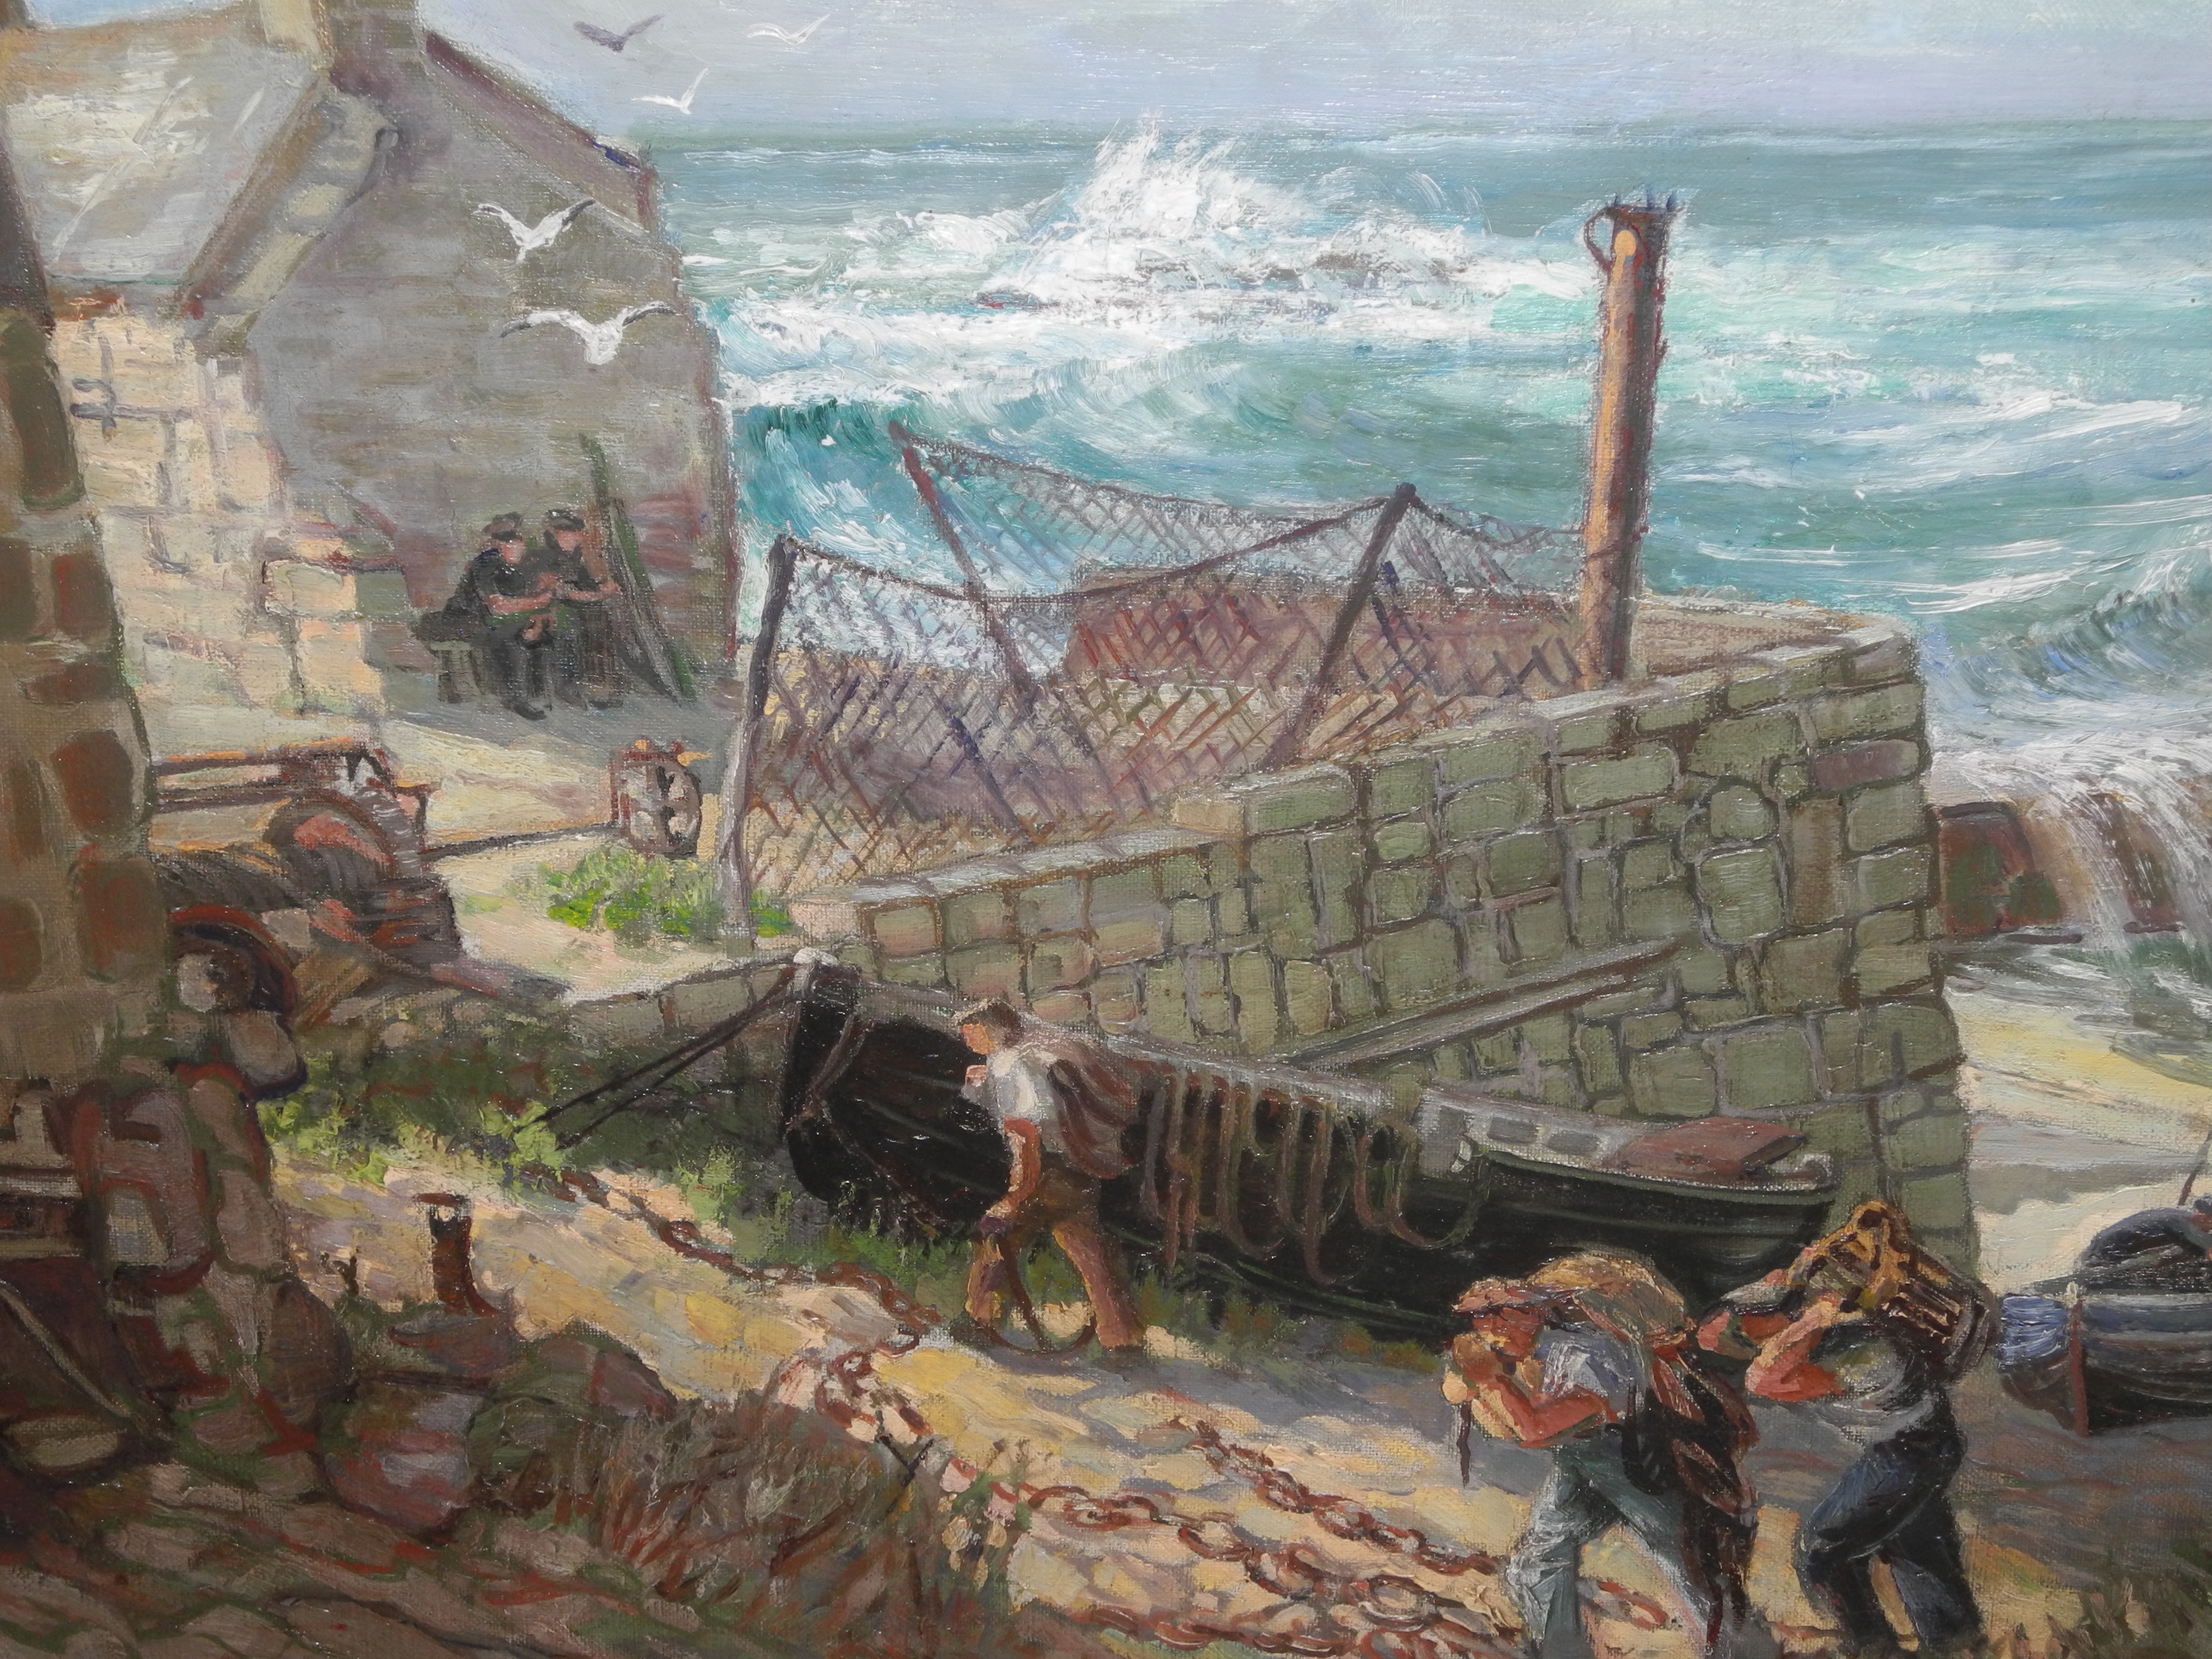 Isabel Wrightson (1890-Unknown), "Cornish Harbour Scene", oil on canvas, signed and dated 1951 (30 x